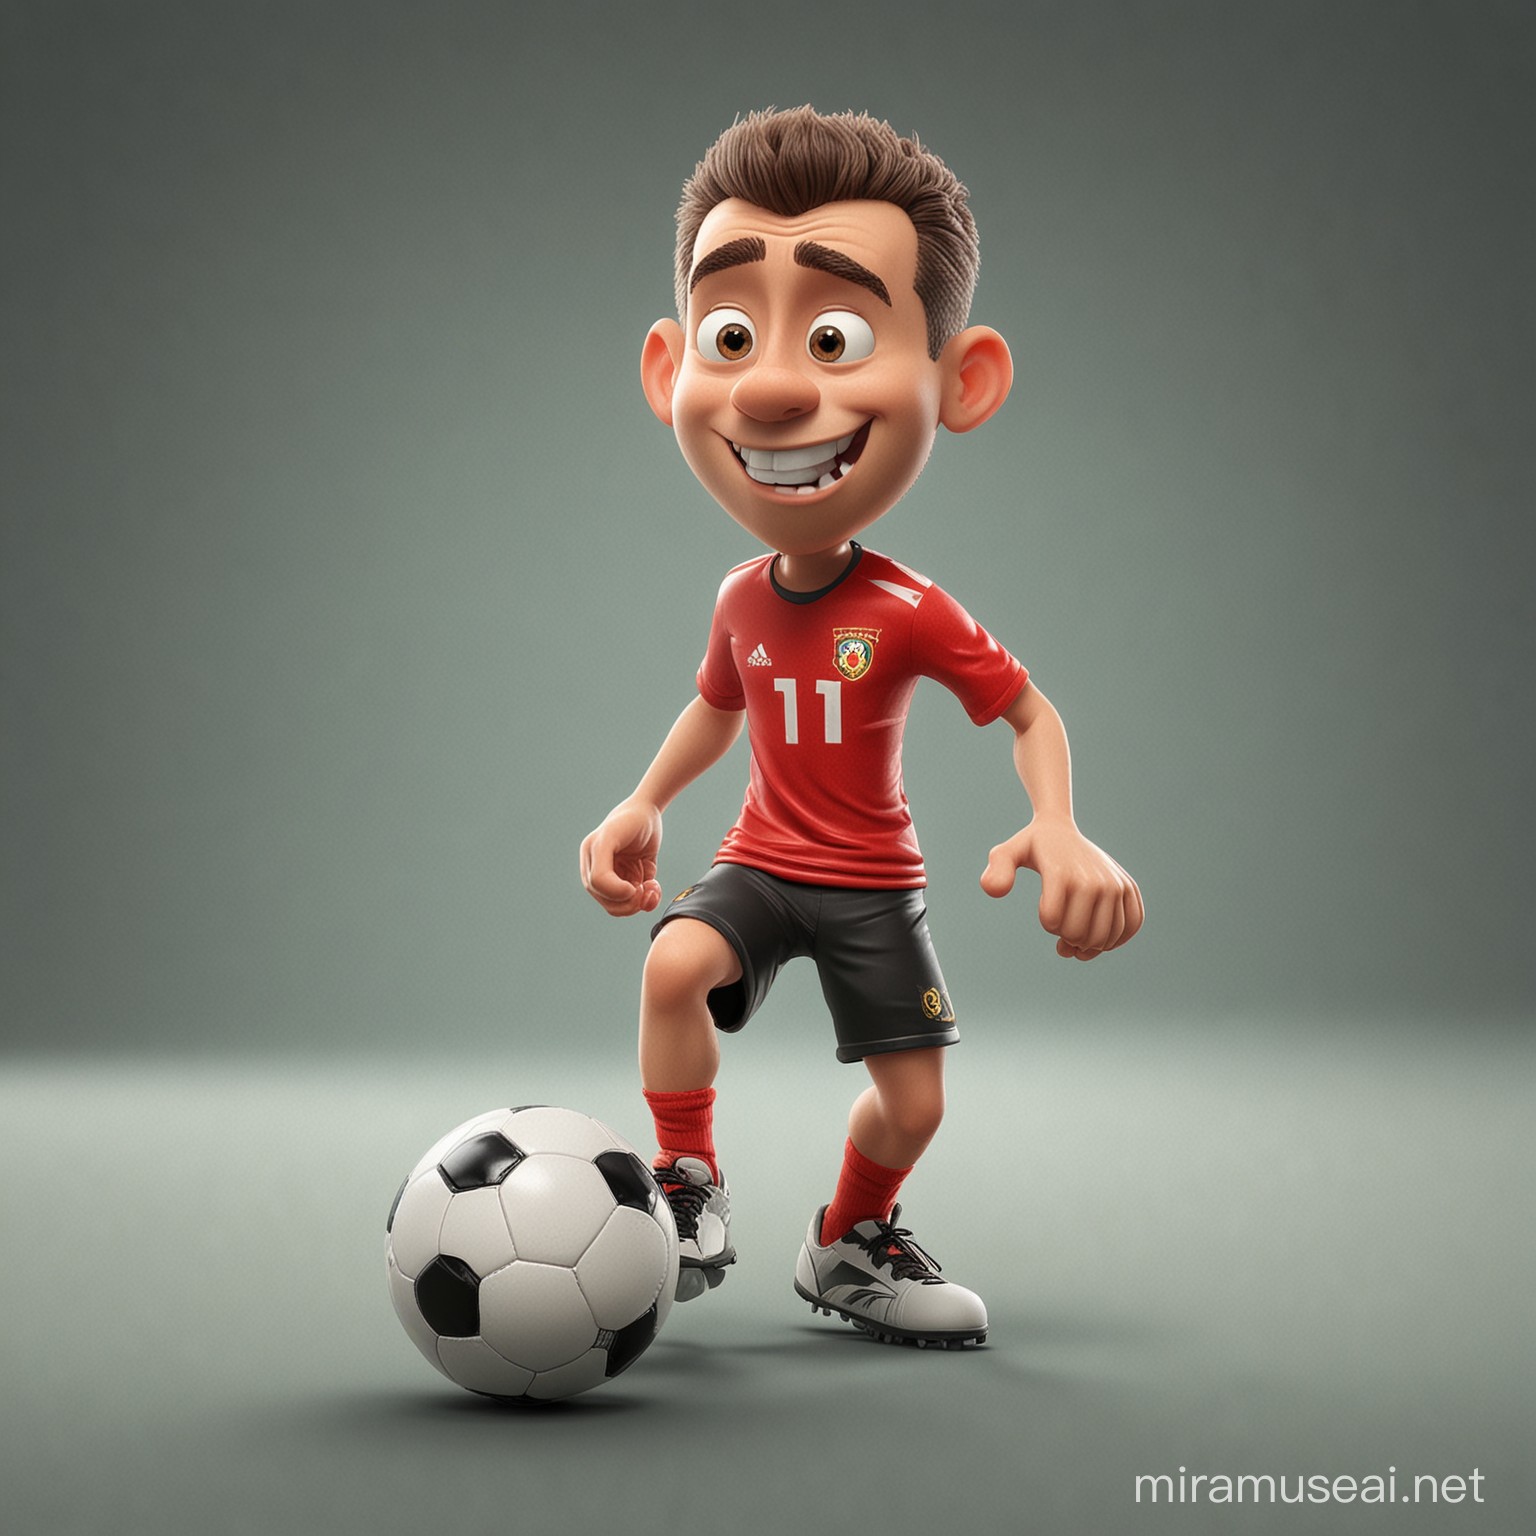 Cartoon Character Dribbling Soccer Ball with Playful Energy